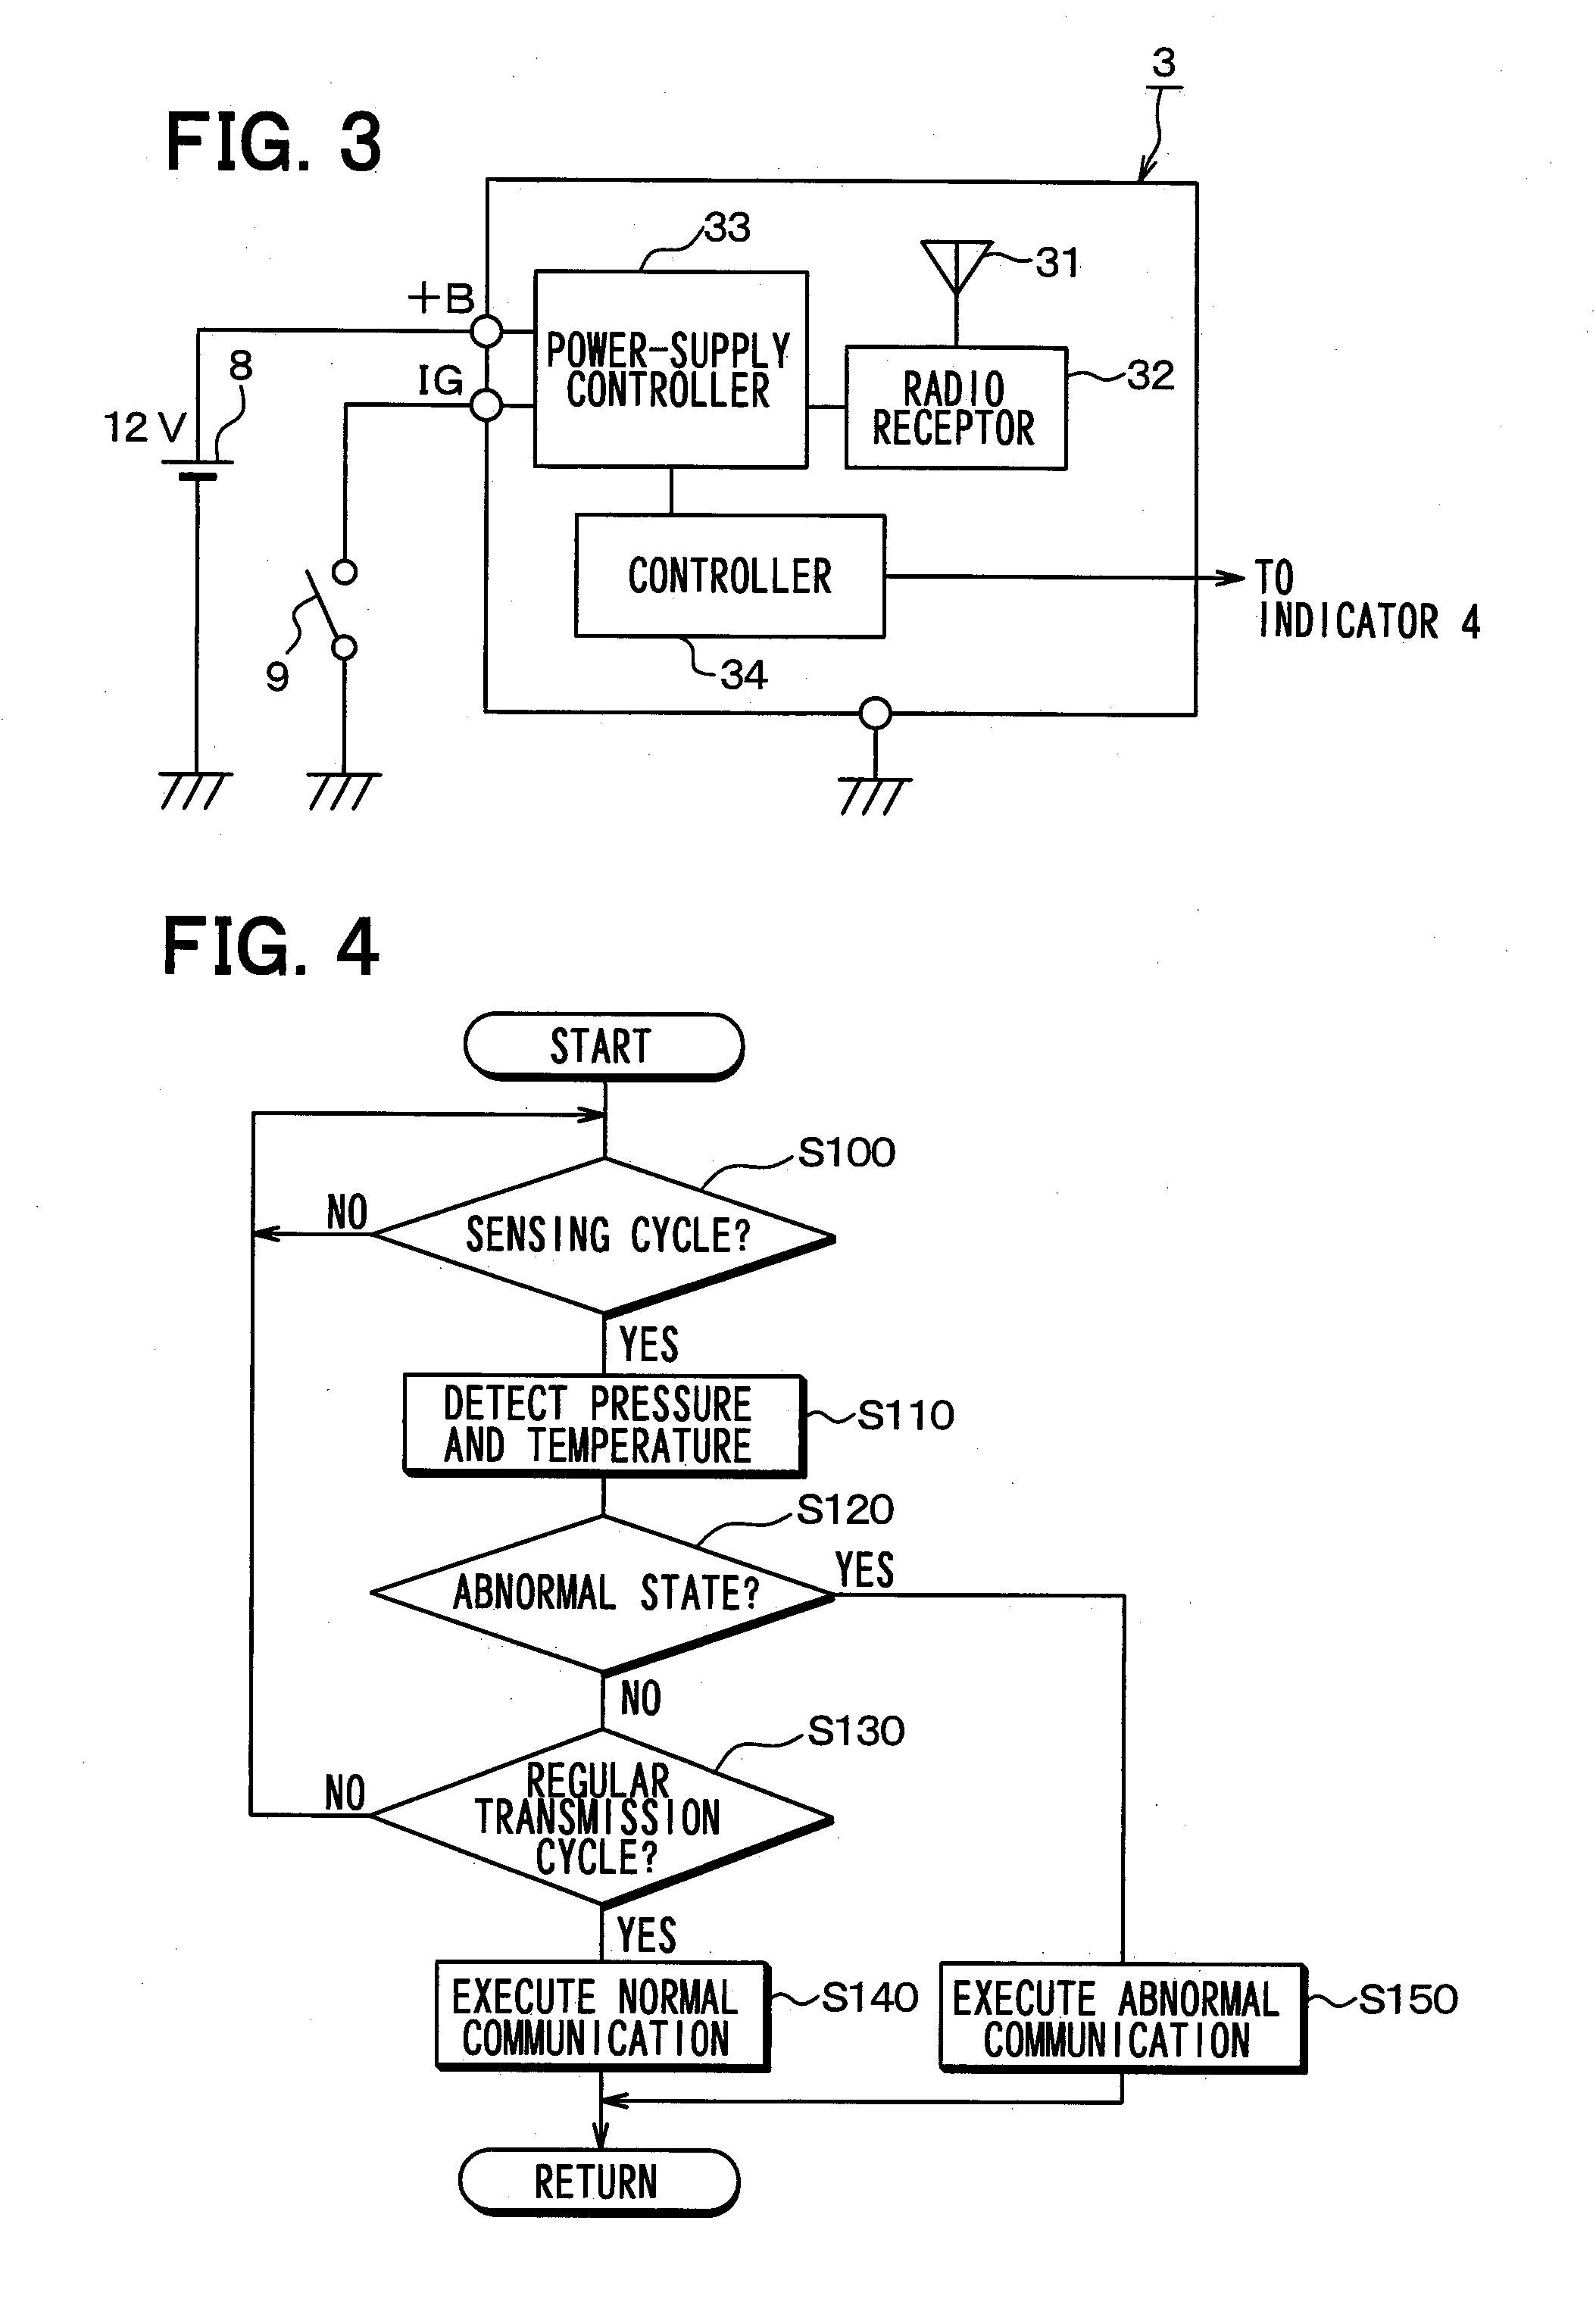 Tire inflation pressure detection device